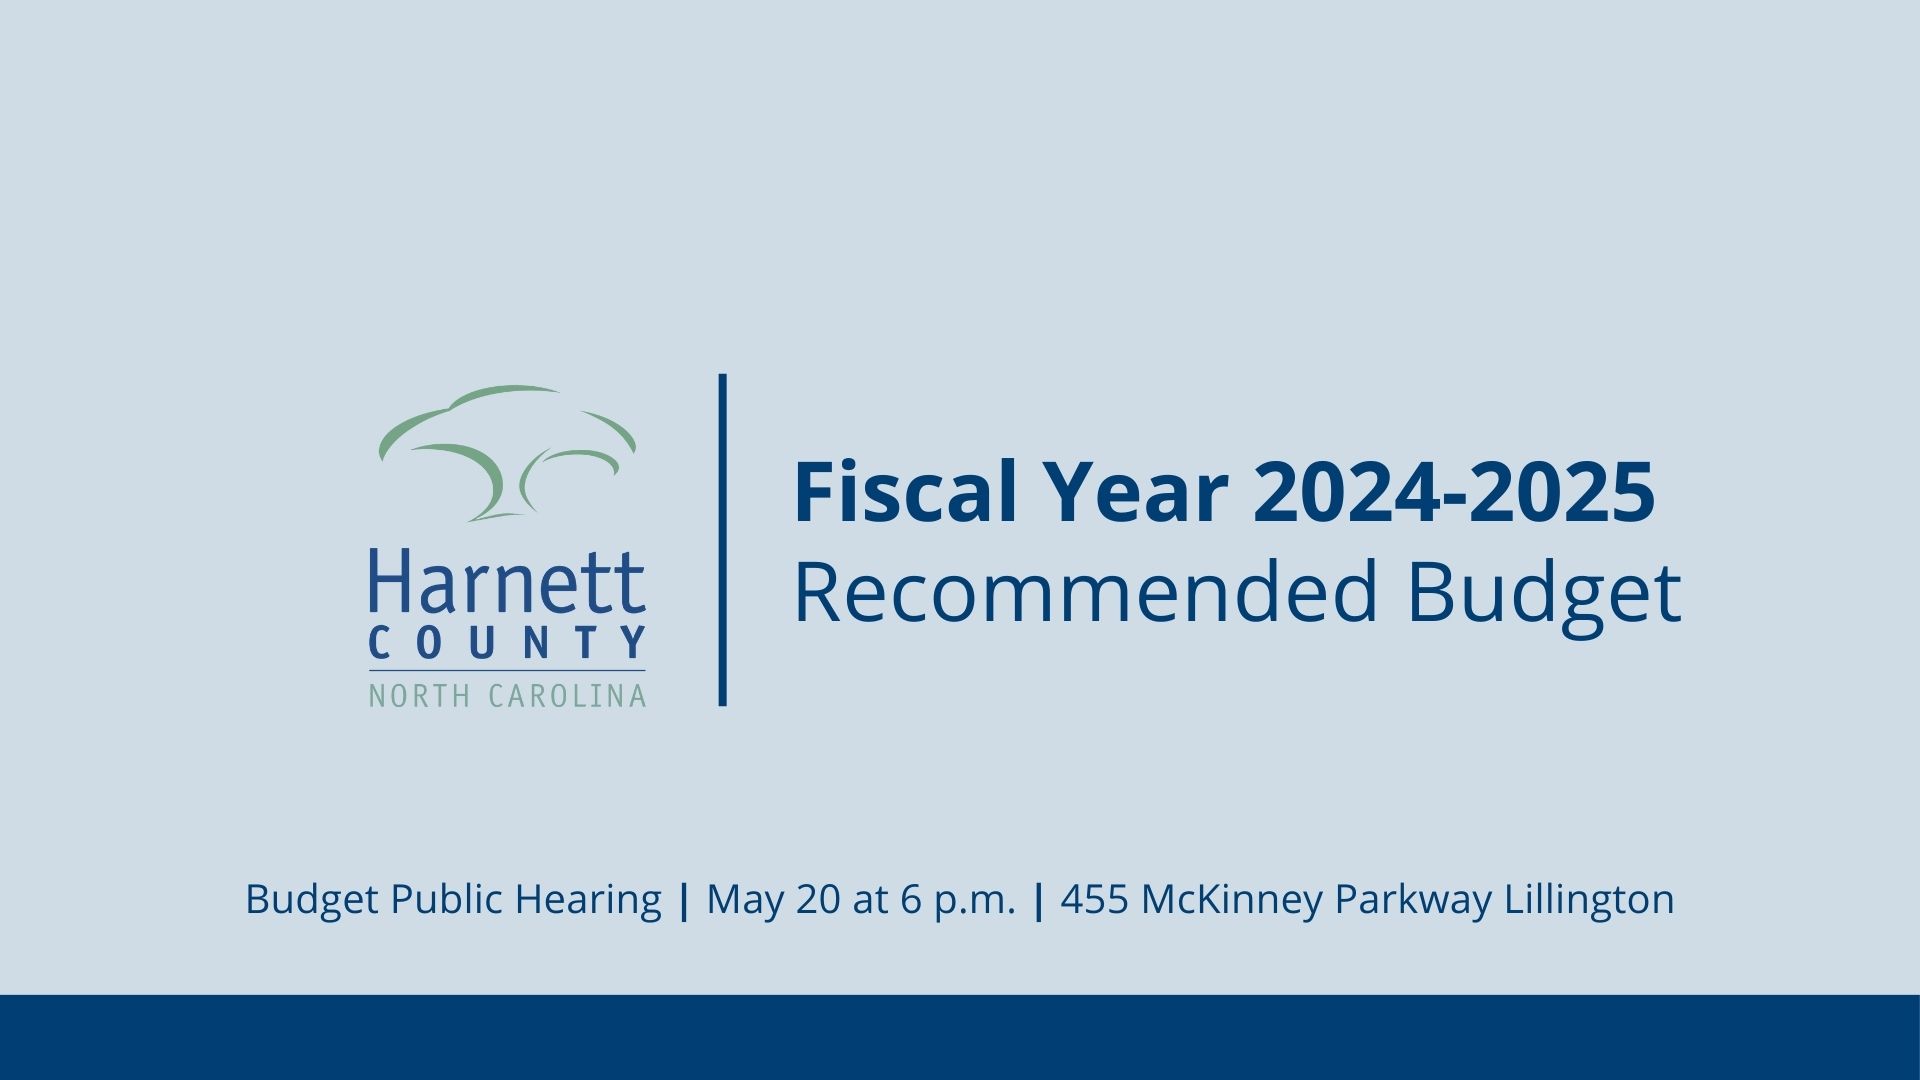 FY 2024-2025 Recommended Budget 